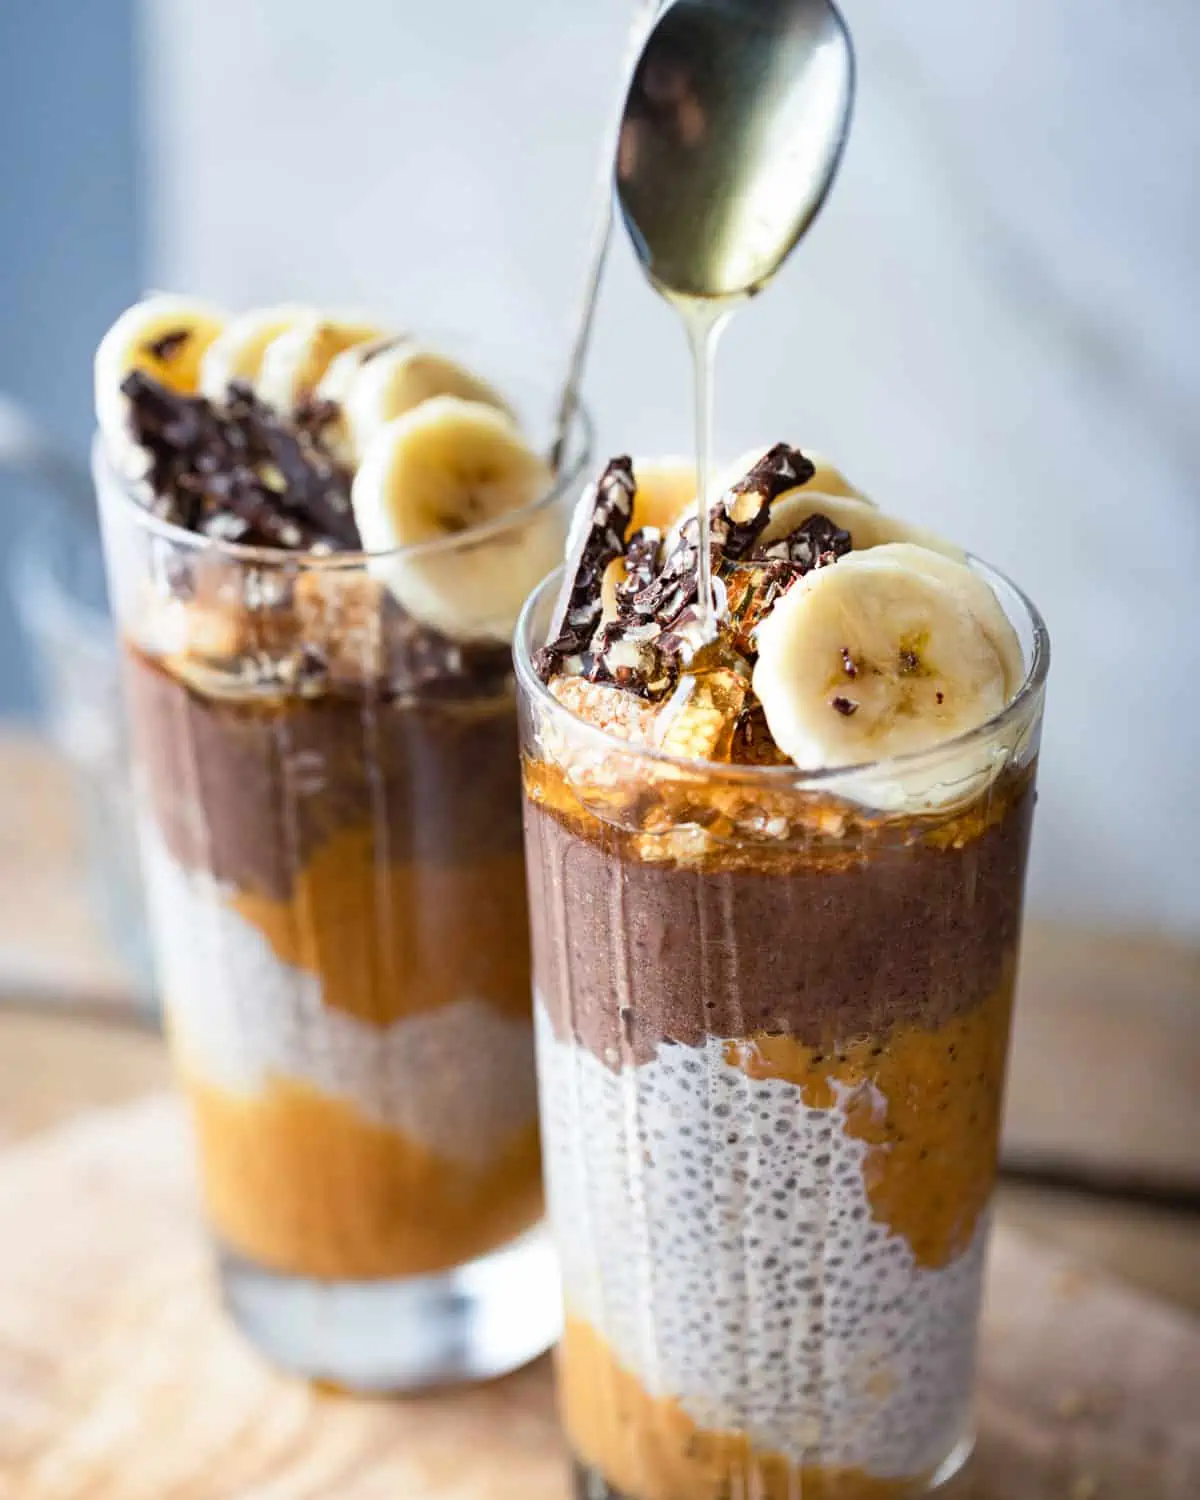 Image of 2 cups with layers of vanilla and chocolate chia pudding with peanute butter and maple syrup.